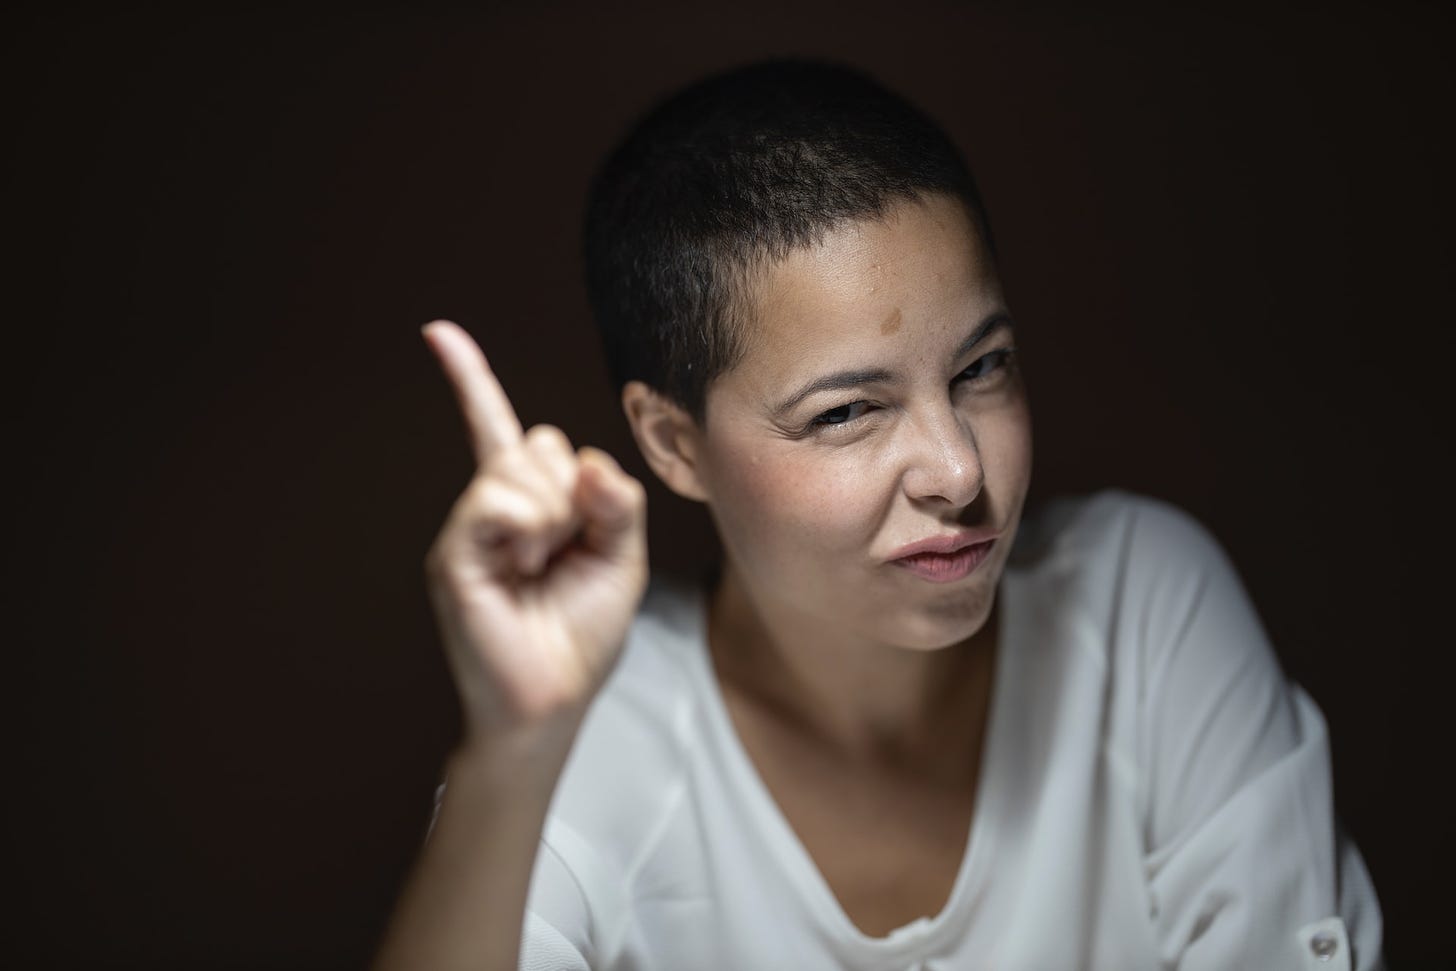 A woman with very short hair, in a white shirt, is giving the finger toward the camera.